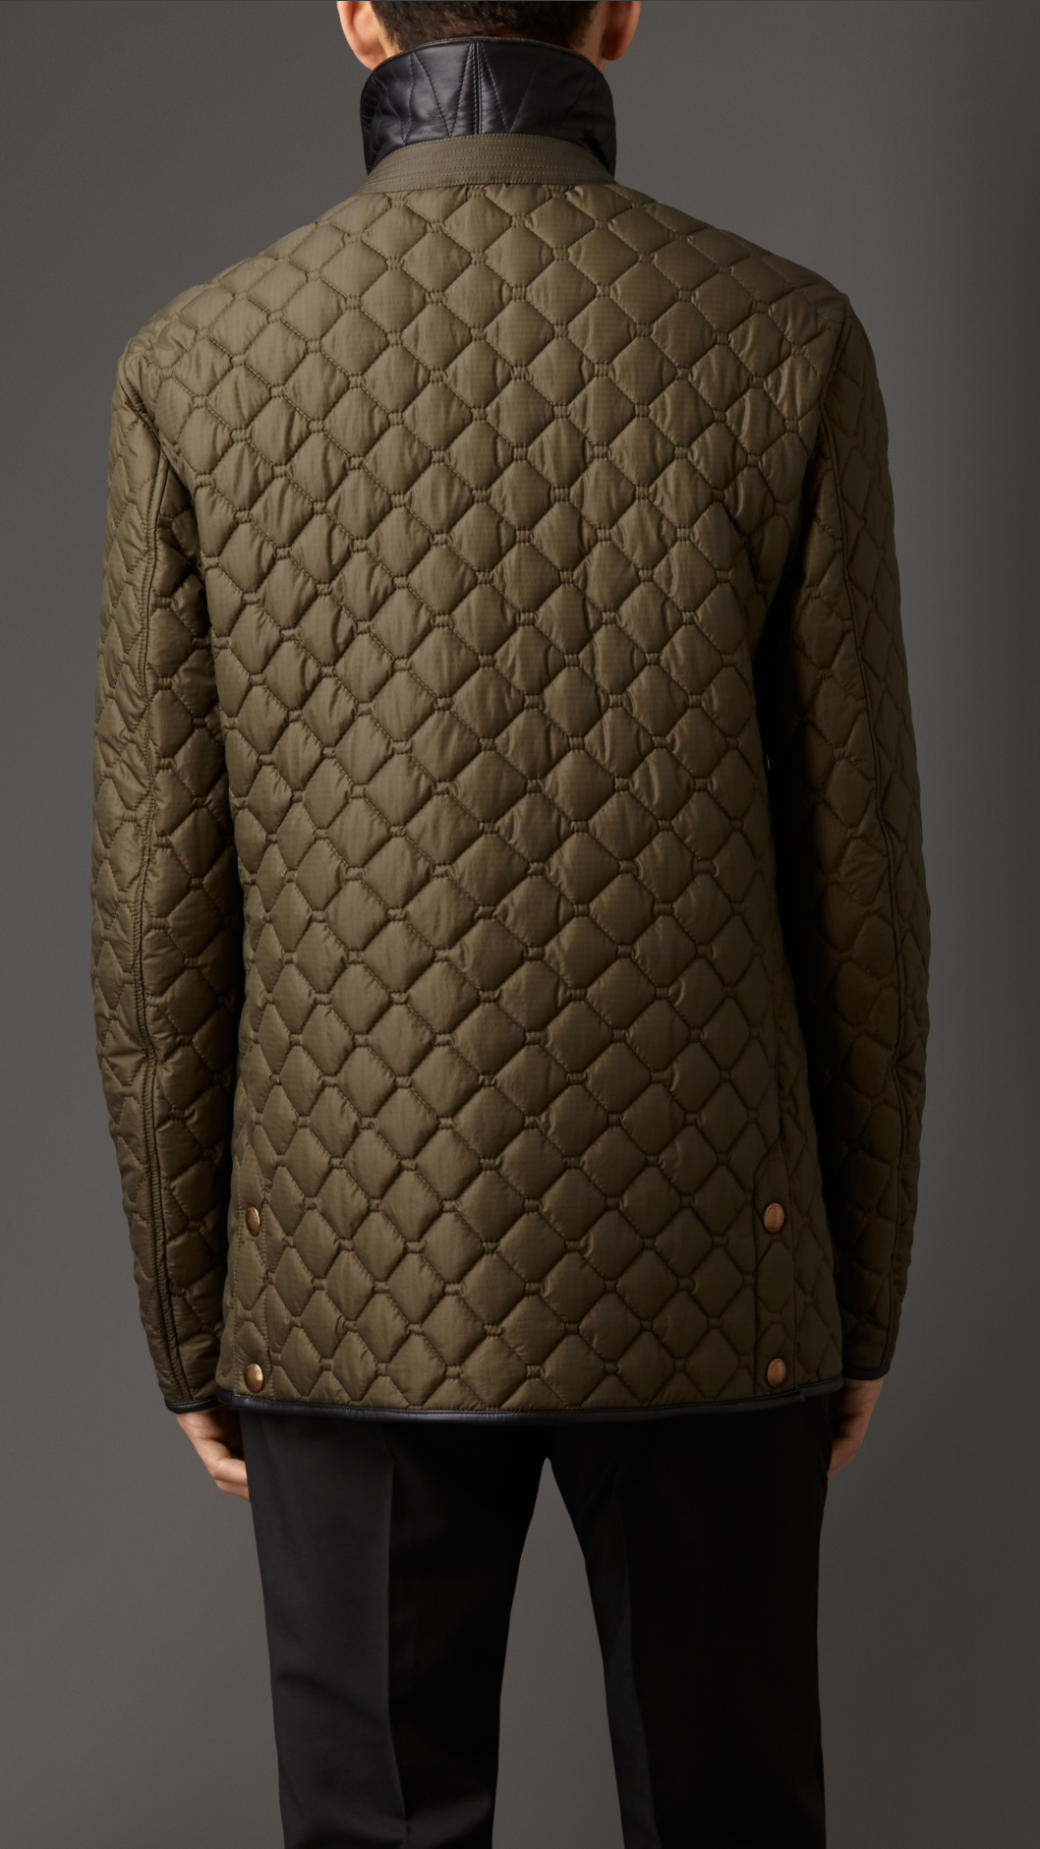 Lyst - Burberry Military Quilt Field Jacket in Green for Men